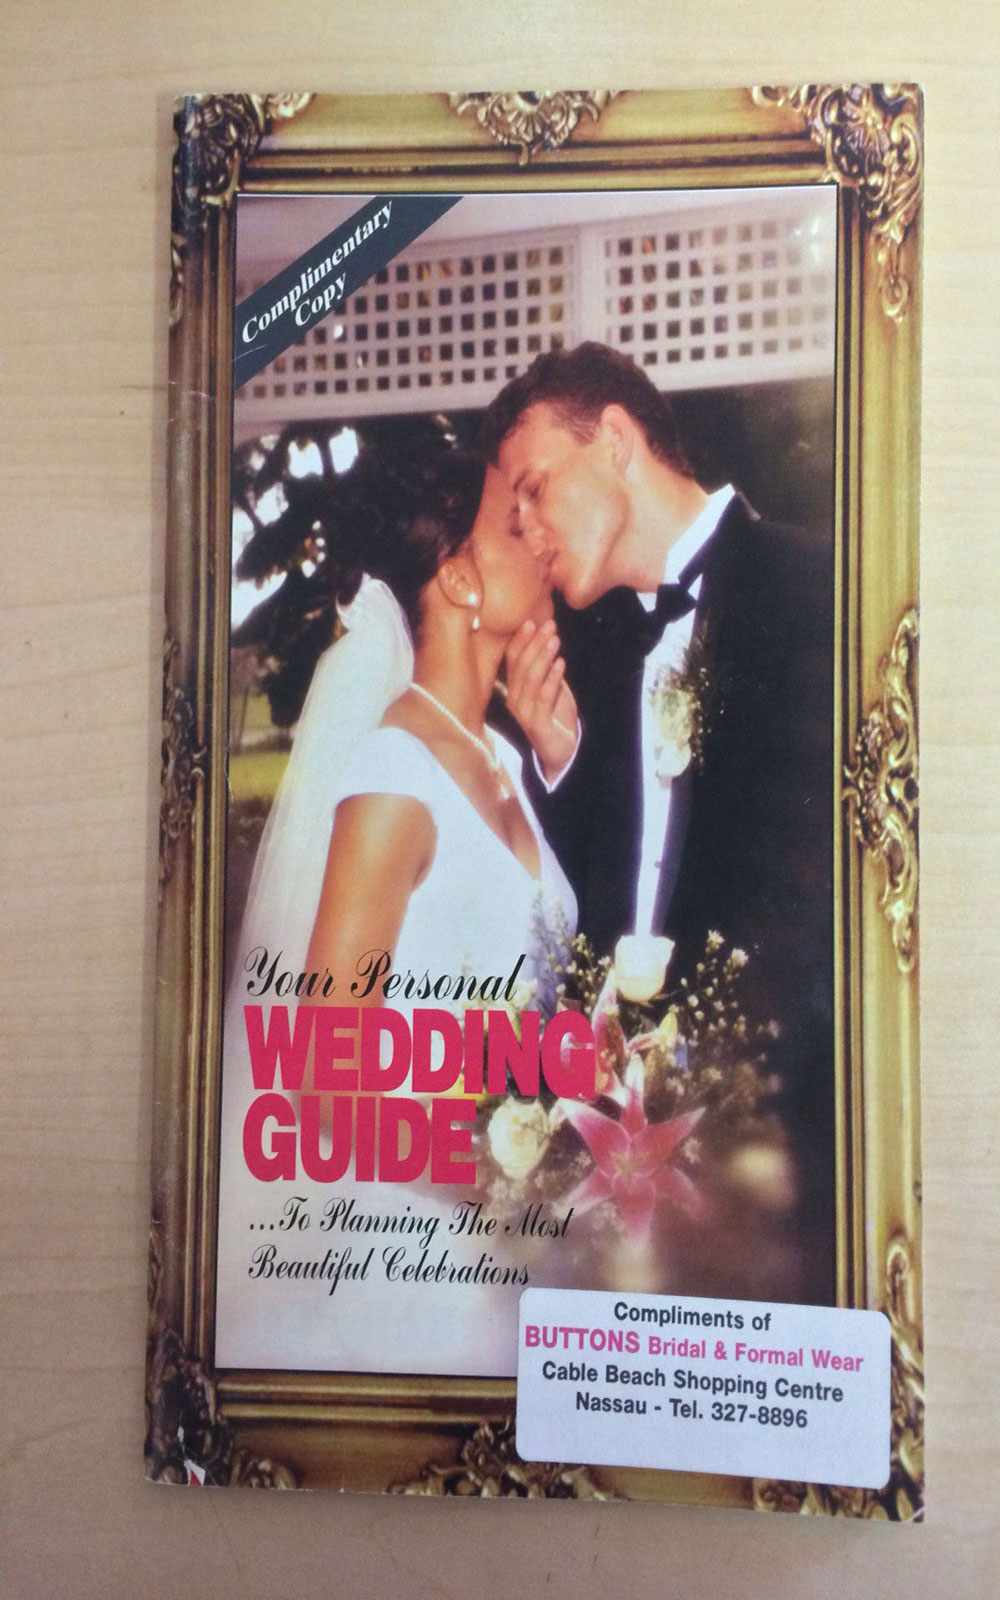 The Wedding Guide 1998